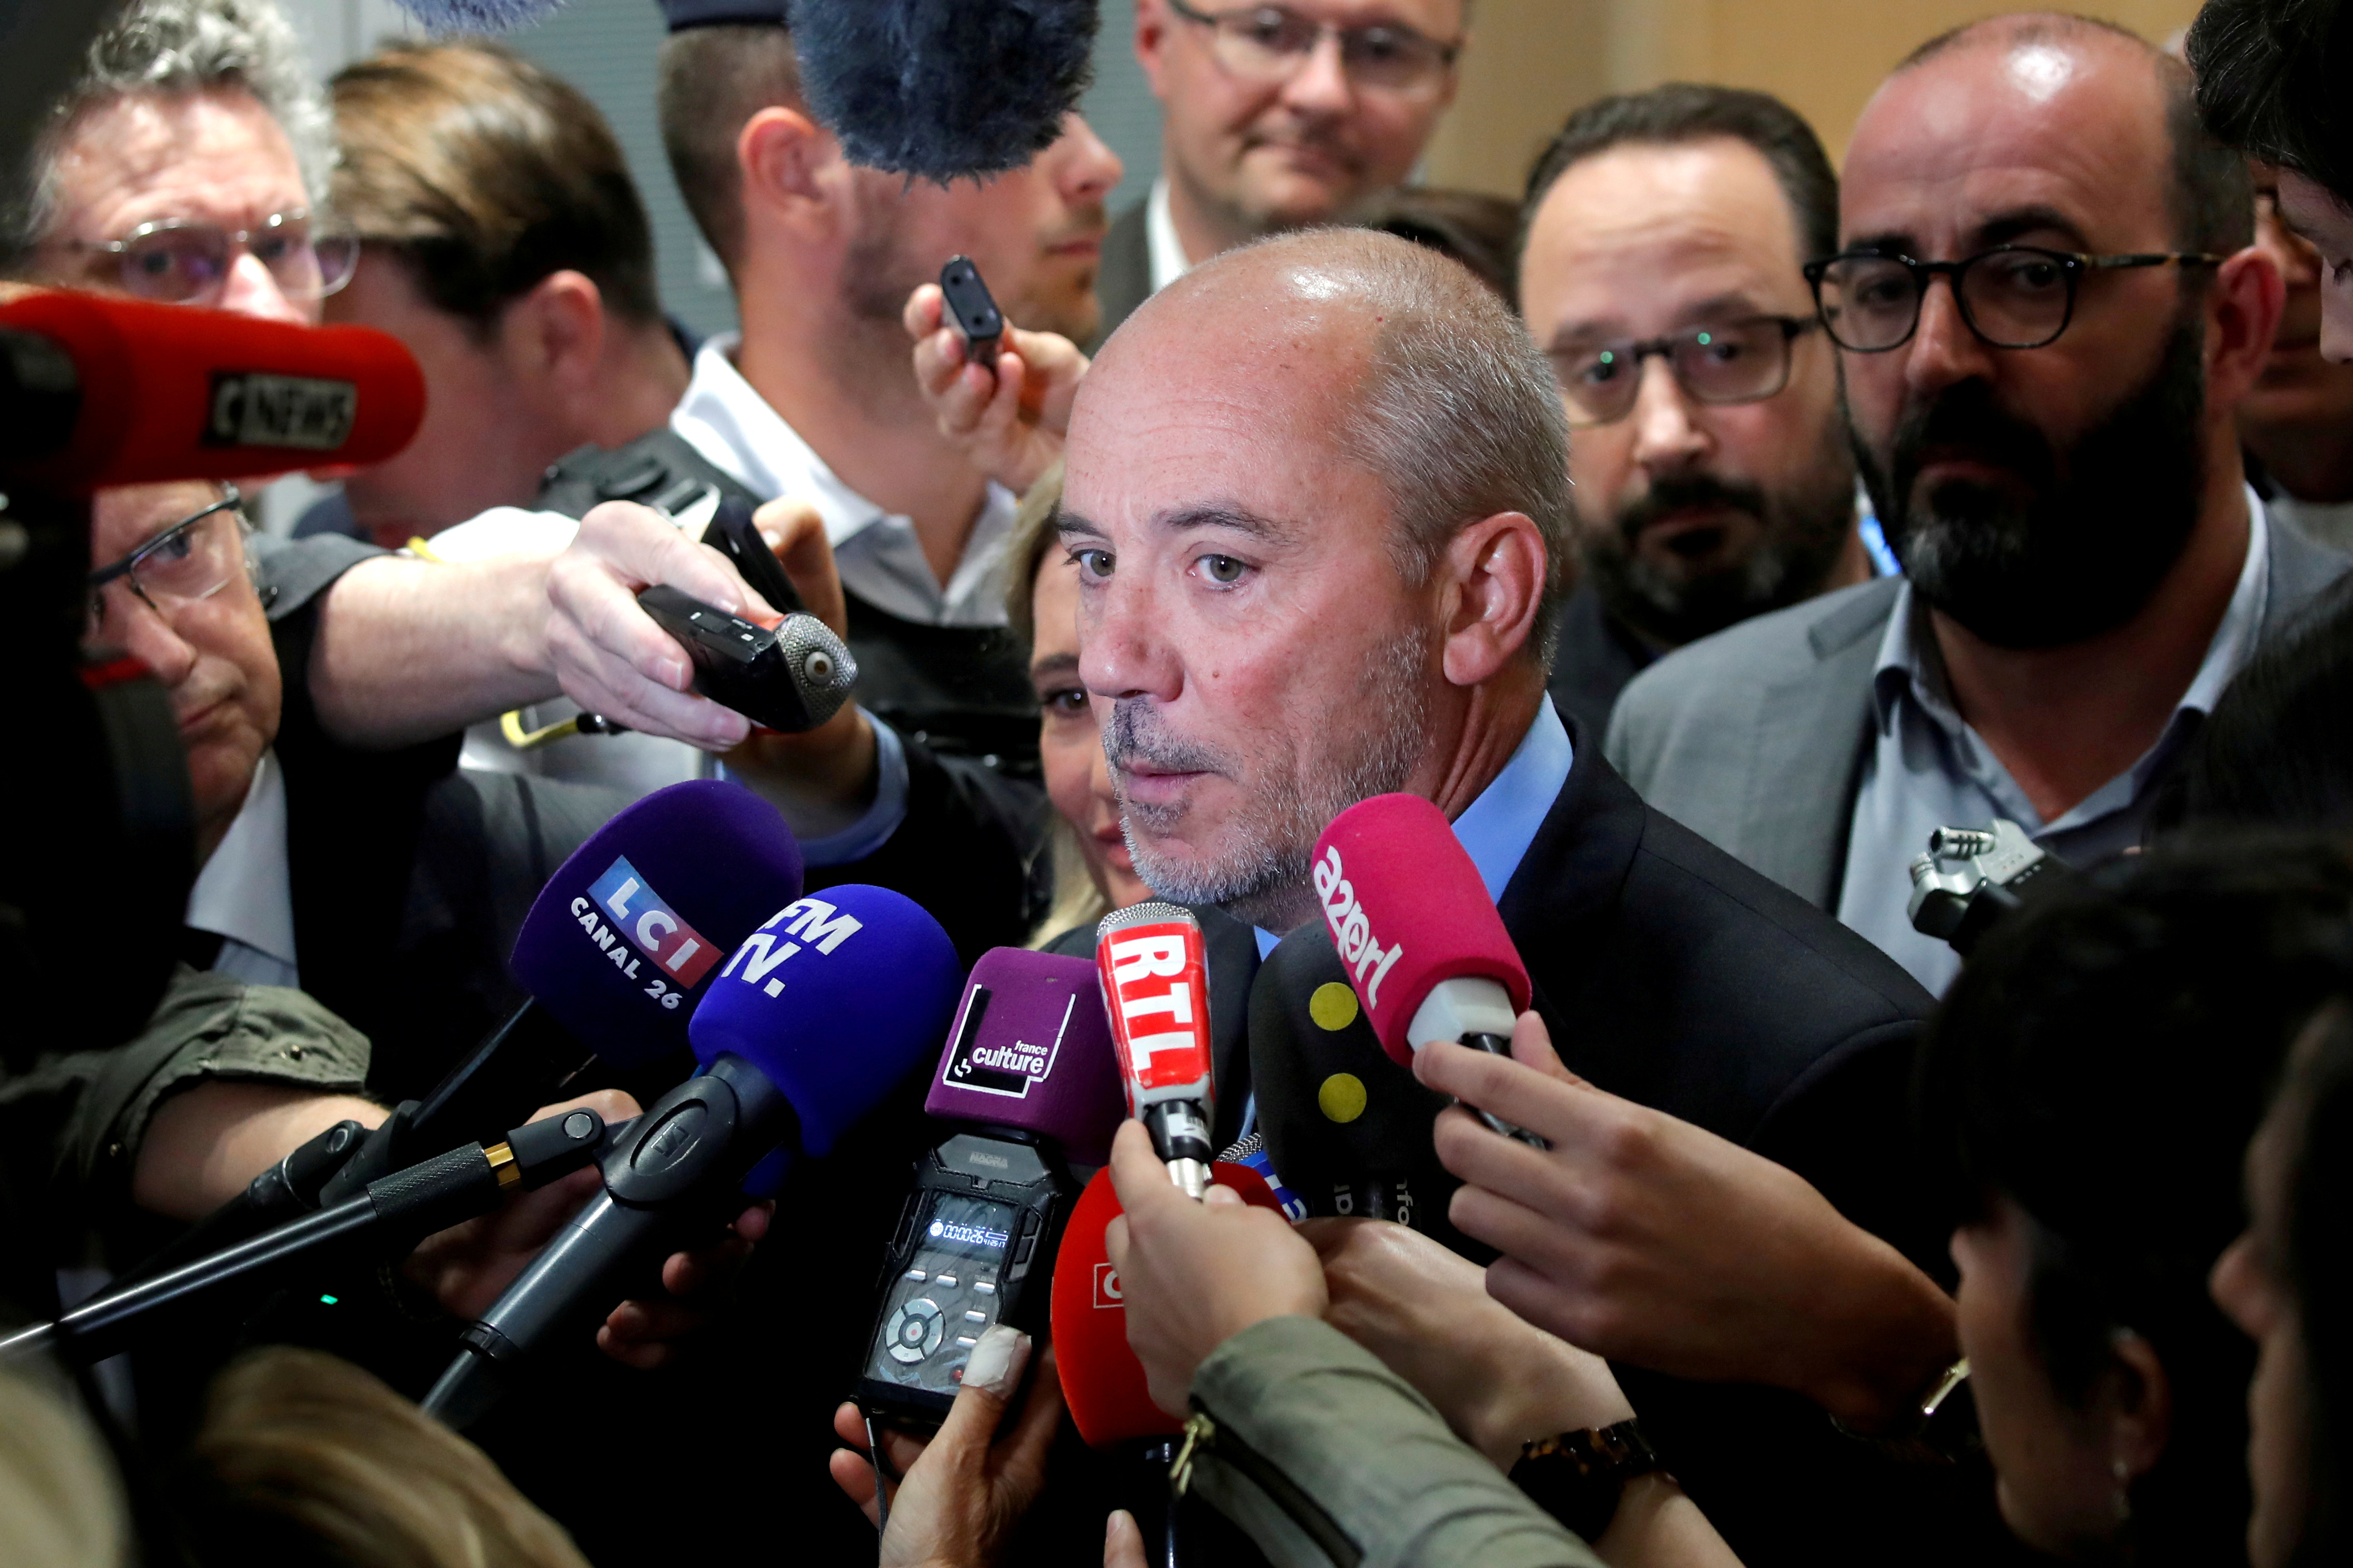 Orange chief executive Stephane Richard speaks to reporters inside the courthouse in Paris